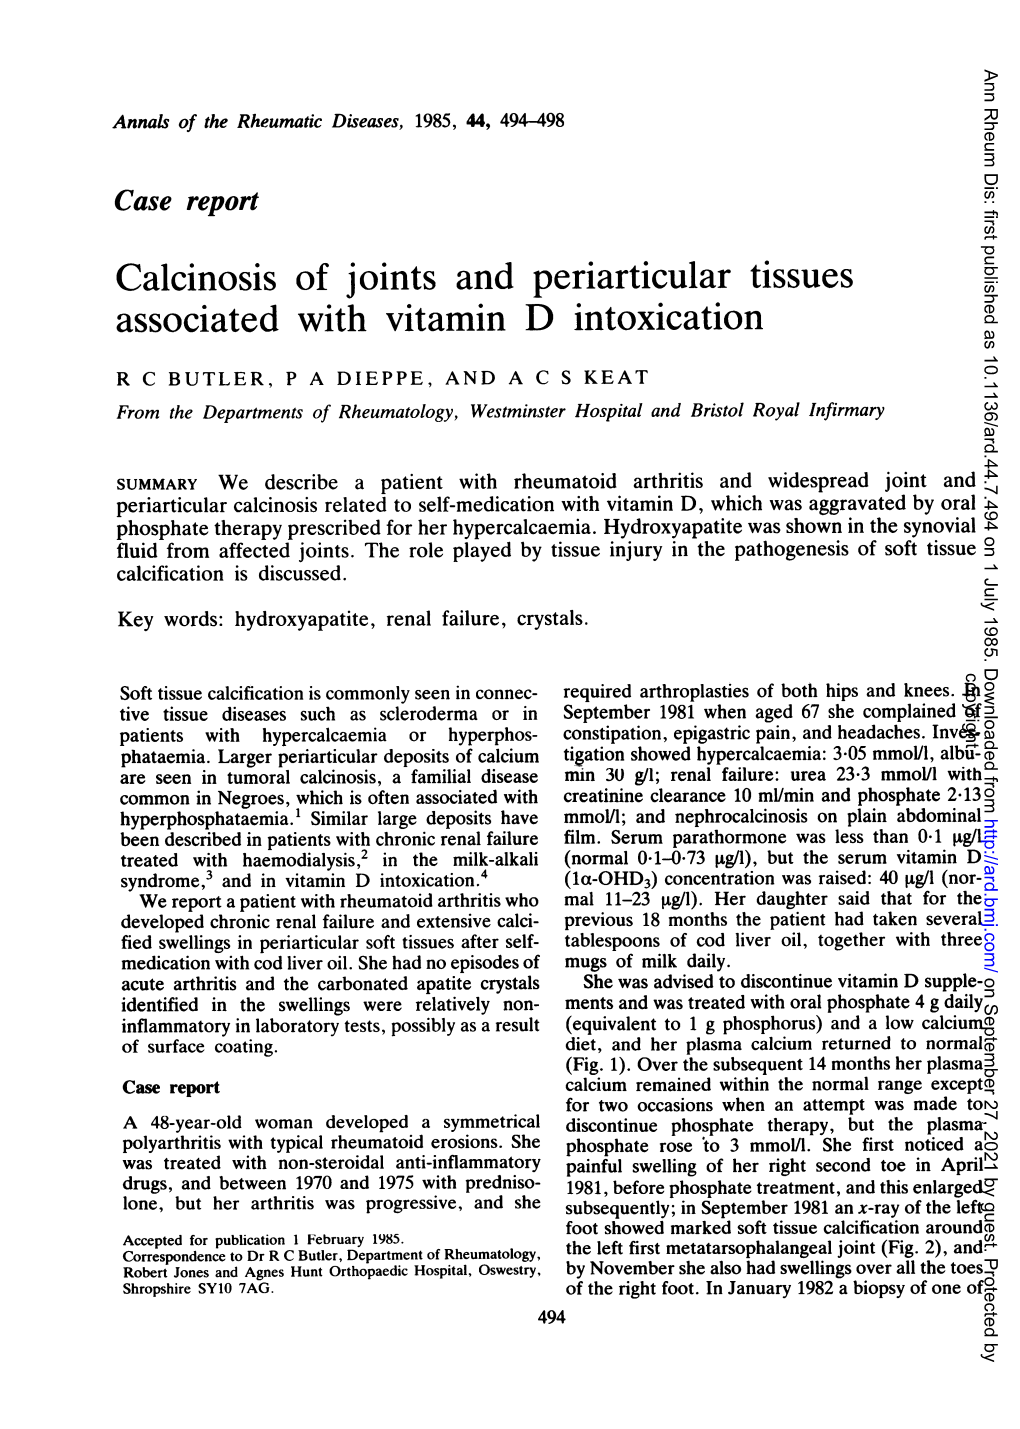 Calcinosis of Joints and Periarticular Tissues Associated with Vitamin D Intoxication